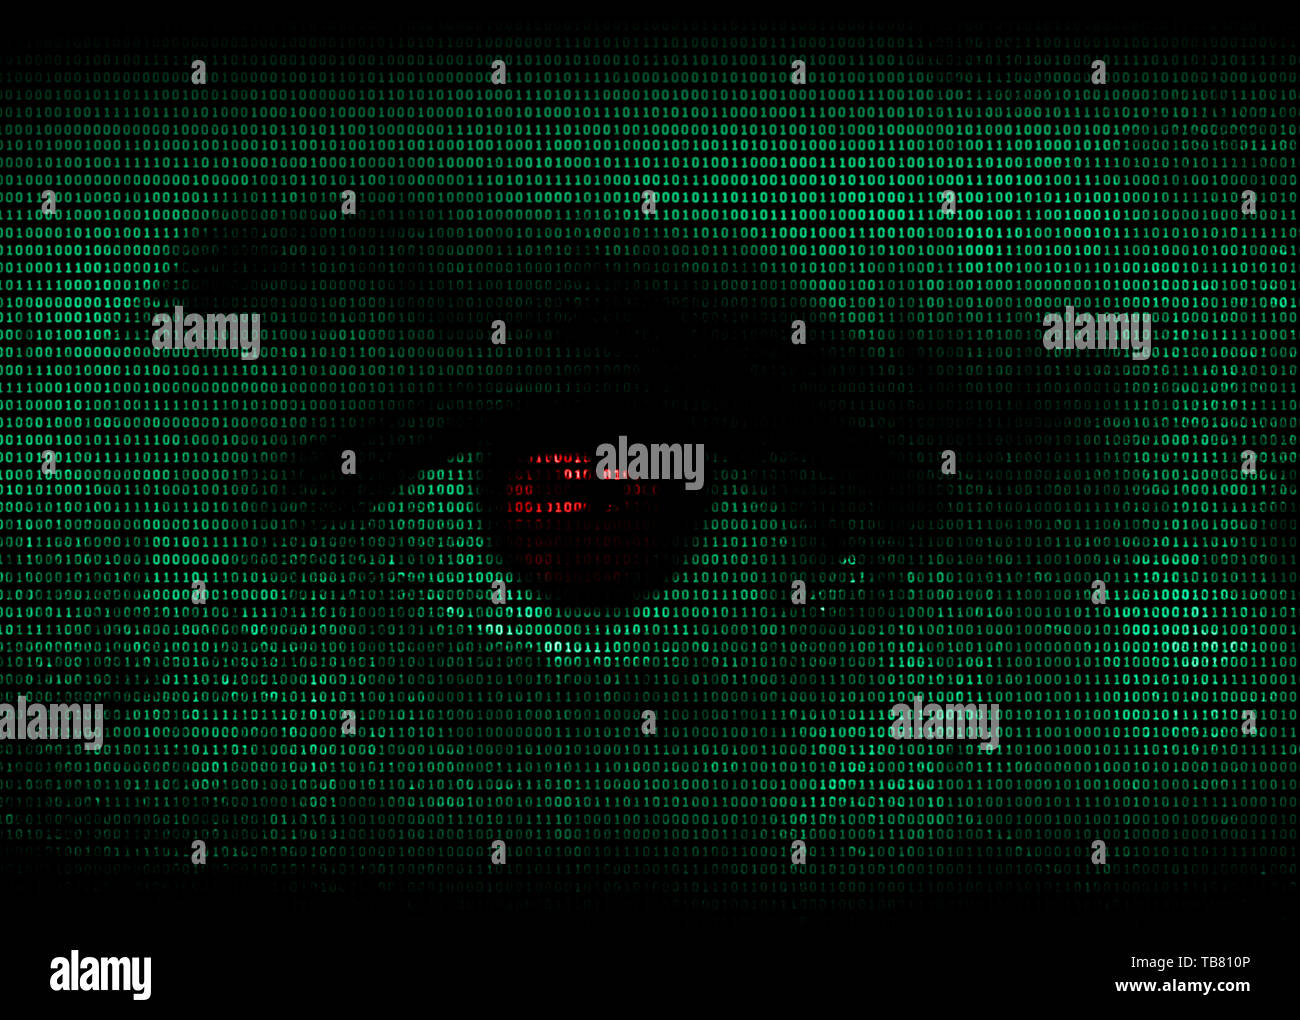 Human eye made up of binary data concept of online privacy and security Stock Photo